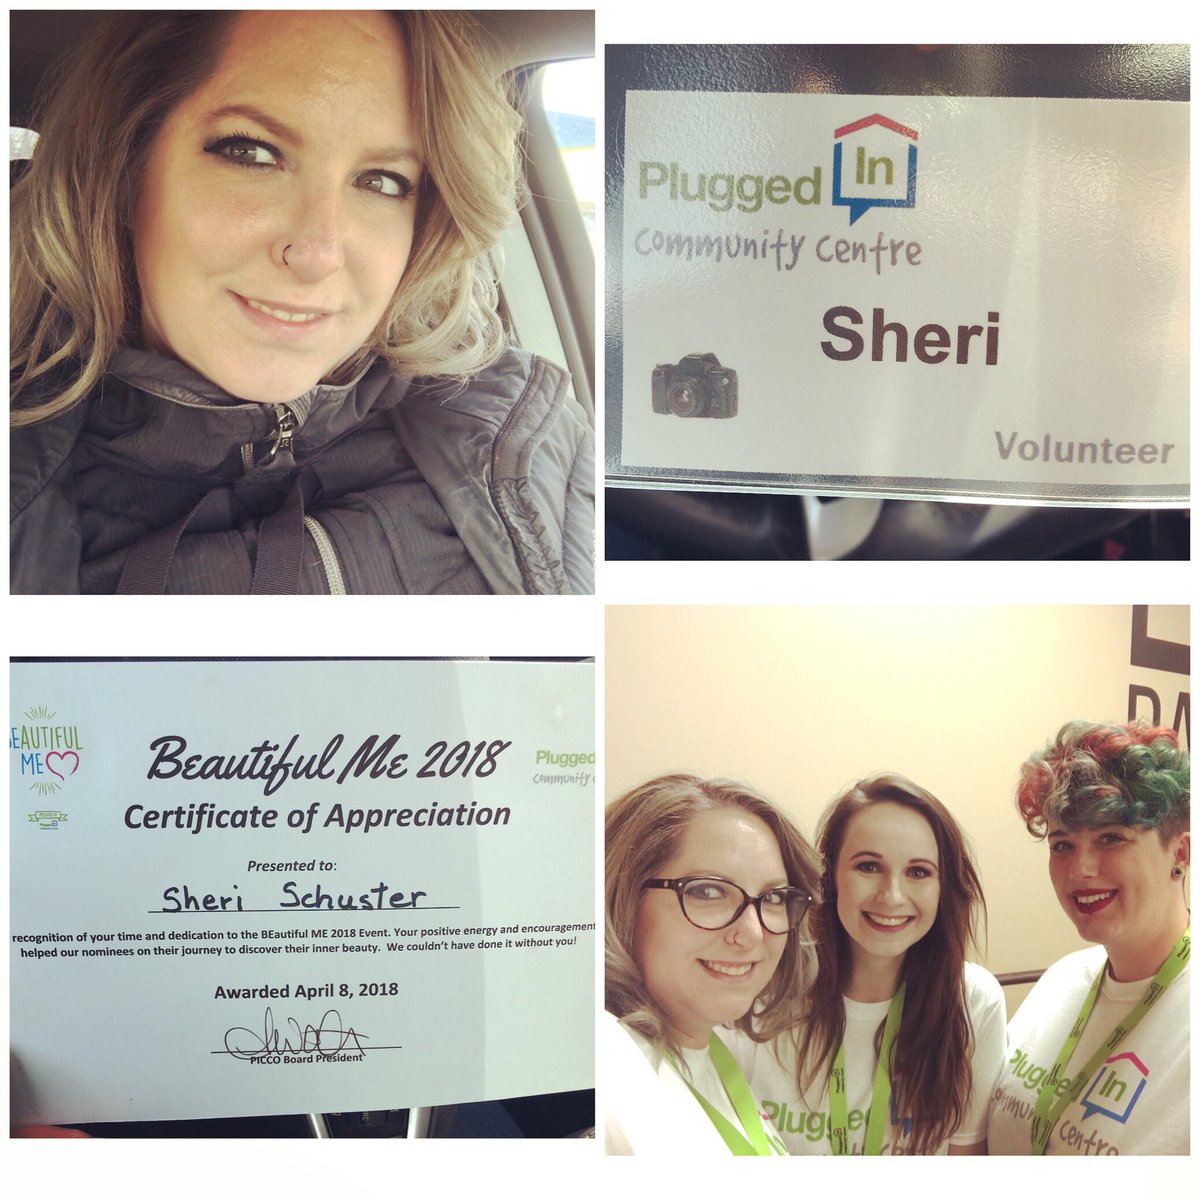 Had an awesome day volunteering with #BeautifulMe #BeMe18 doing hair for some deserving youth. #mentalhealth #hairbysheri #volunteer #useyourgifts #pluggedincommunitycentre #getinvolved #community #beautyis